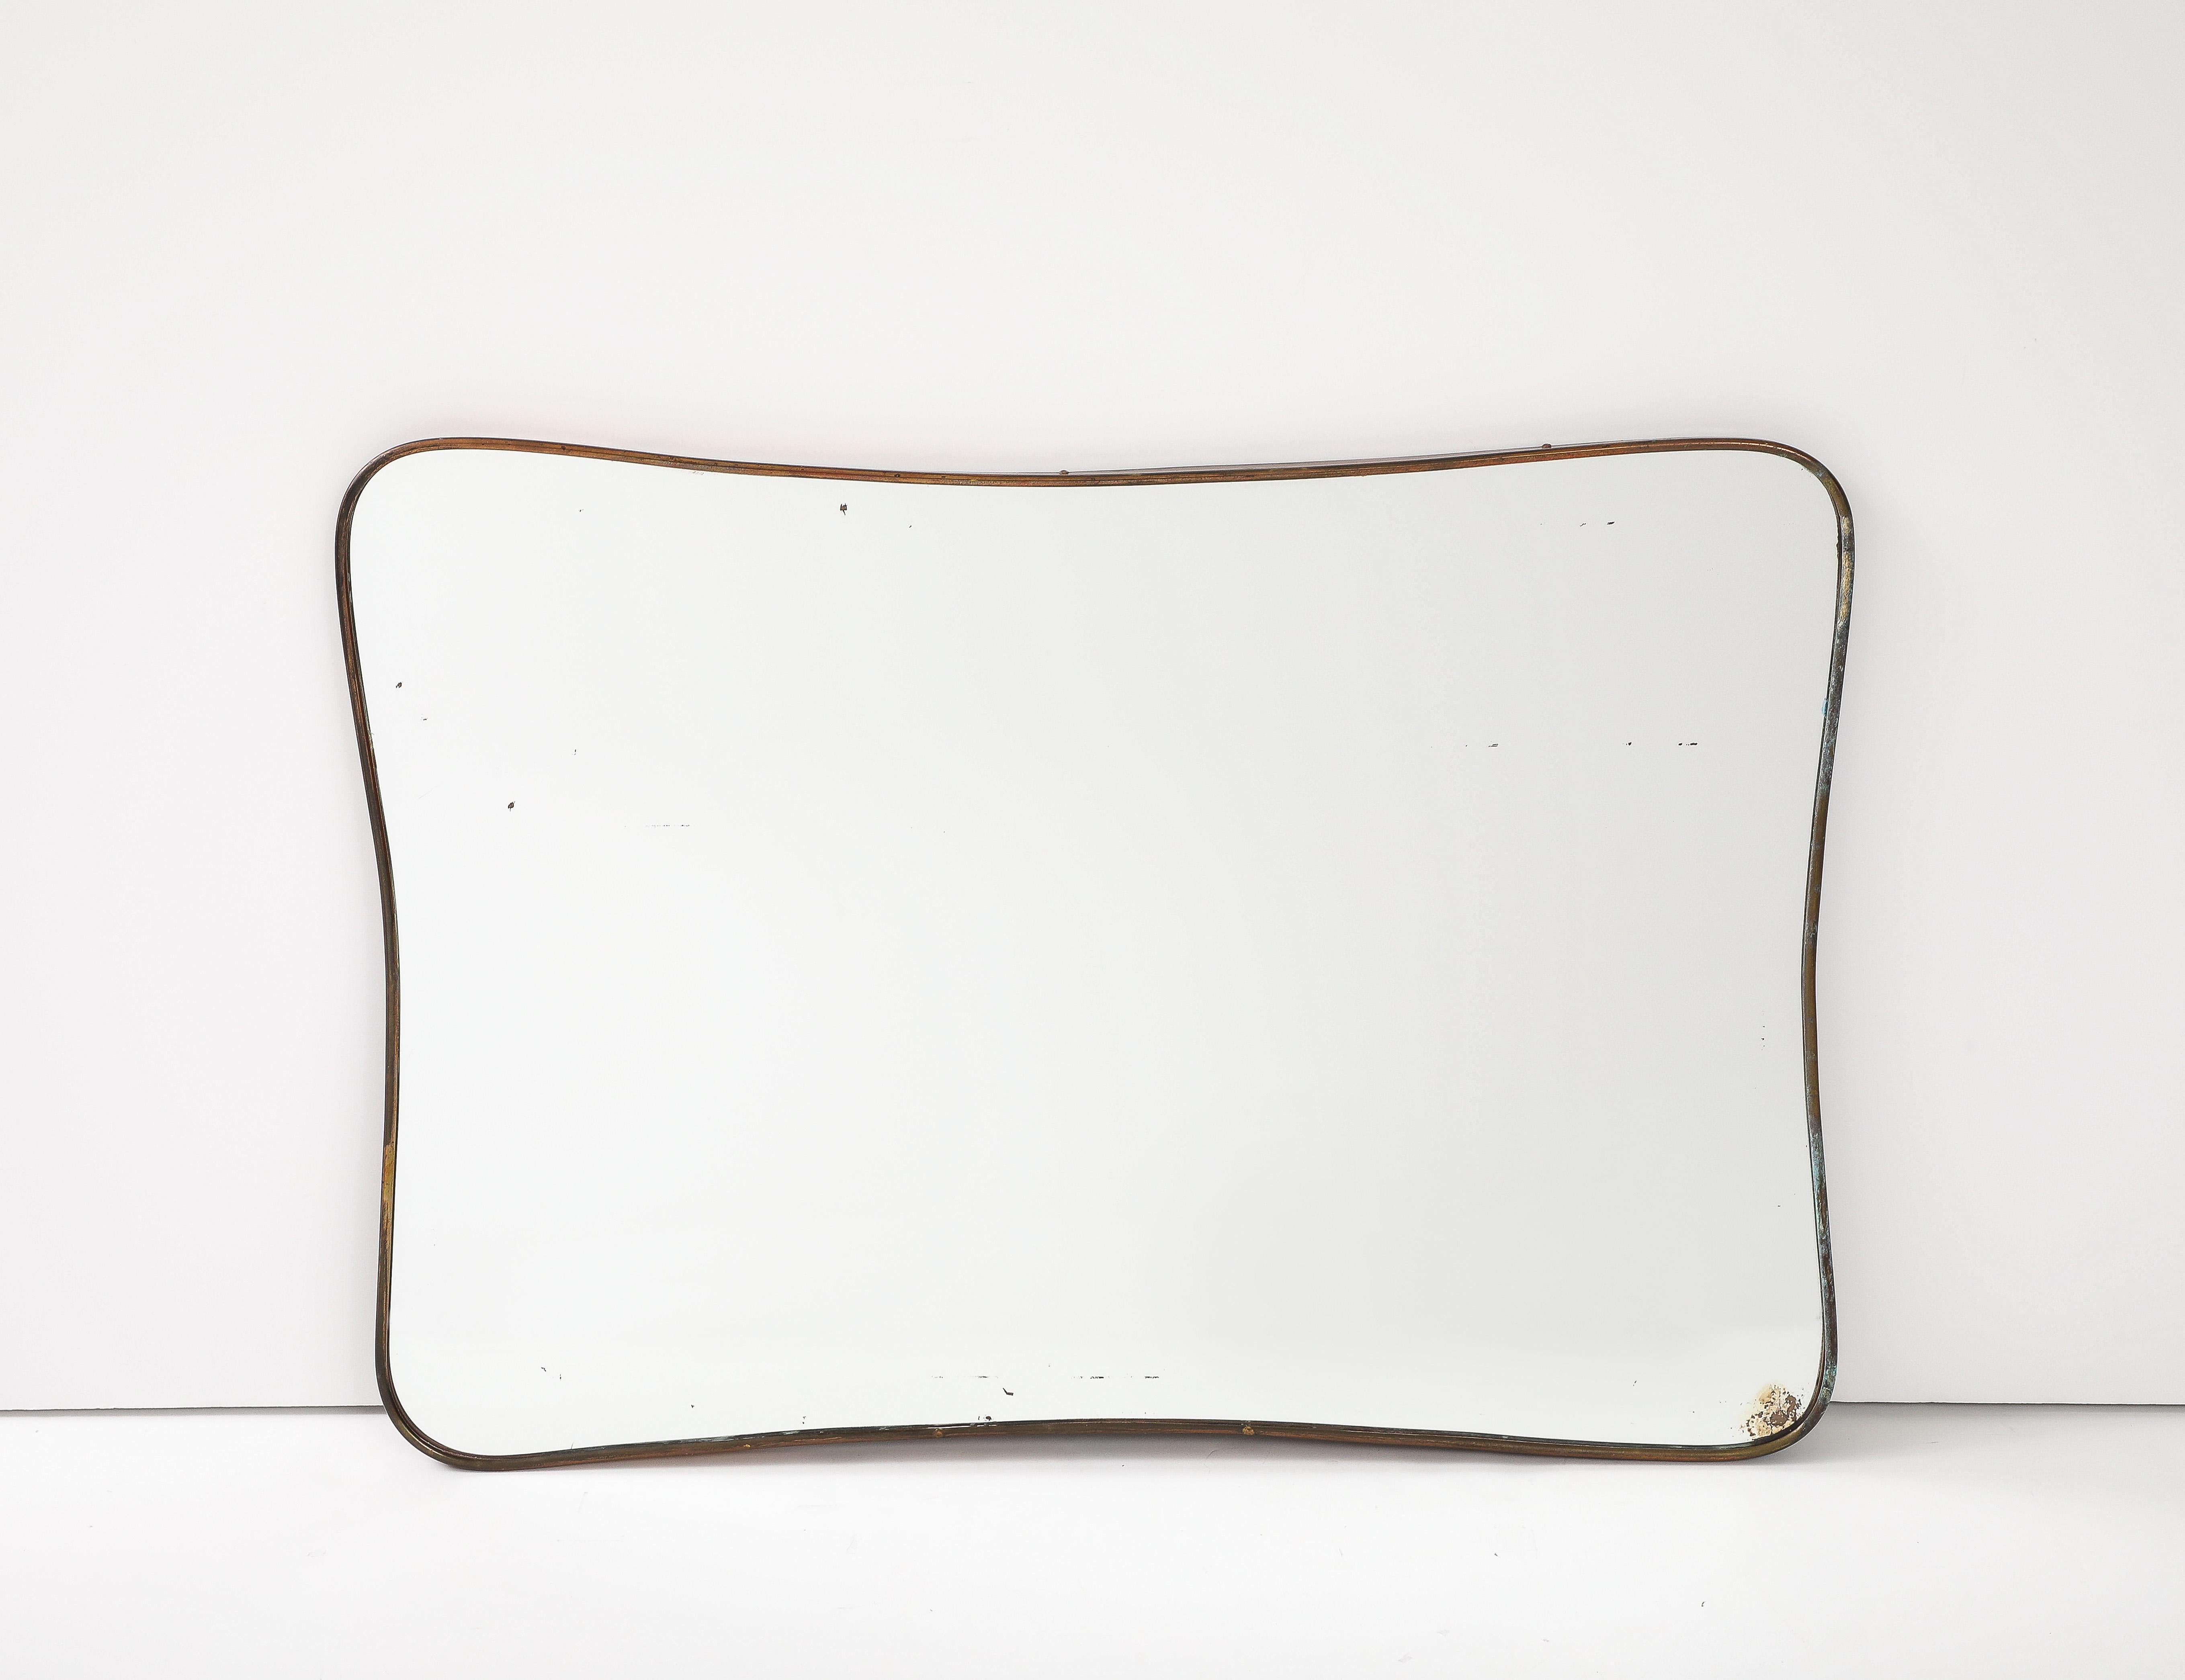 Horizontal Modernist Mirror in the Style of Gio Ponti, Italy, c. 1960
Brass, Glass

H: 24 D: 1 W: 33 in.